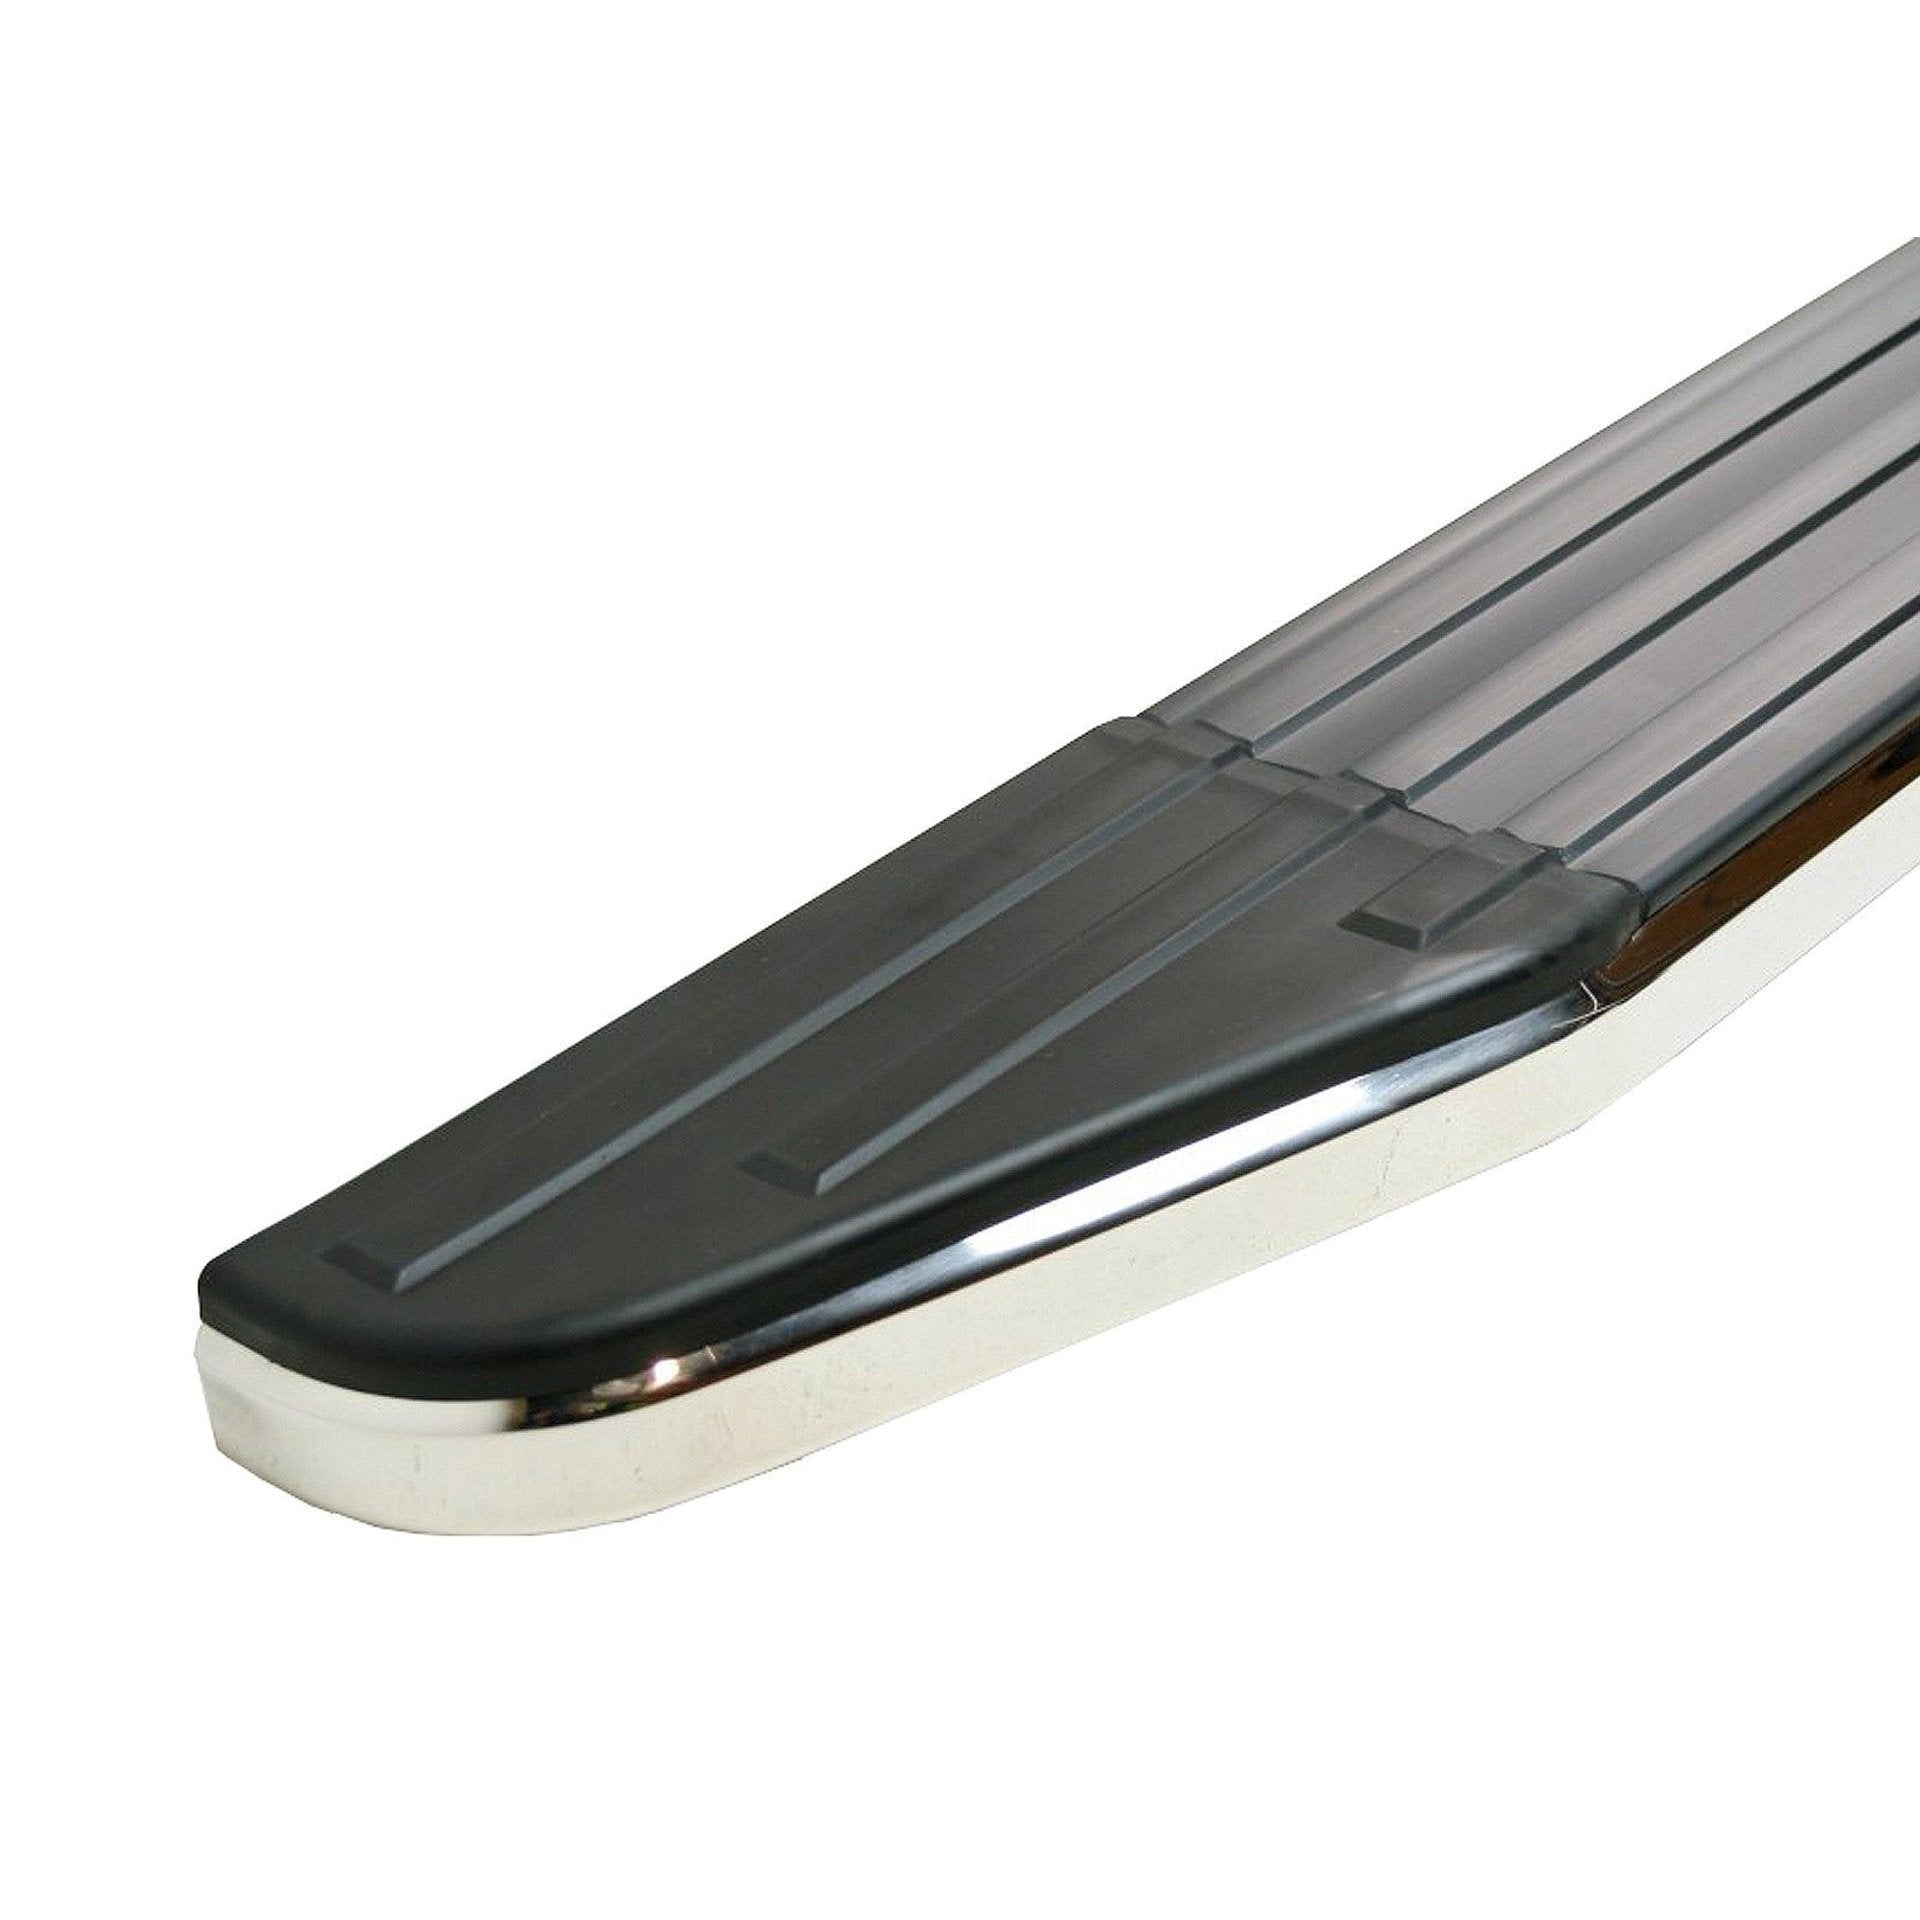 Raptor Side Steps Running Boards for Bentley Bentayga -  - sold by Direct4x4